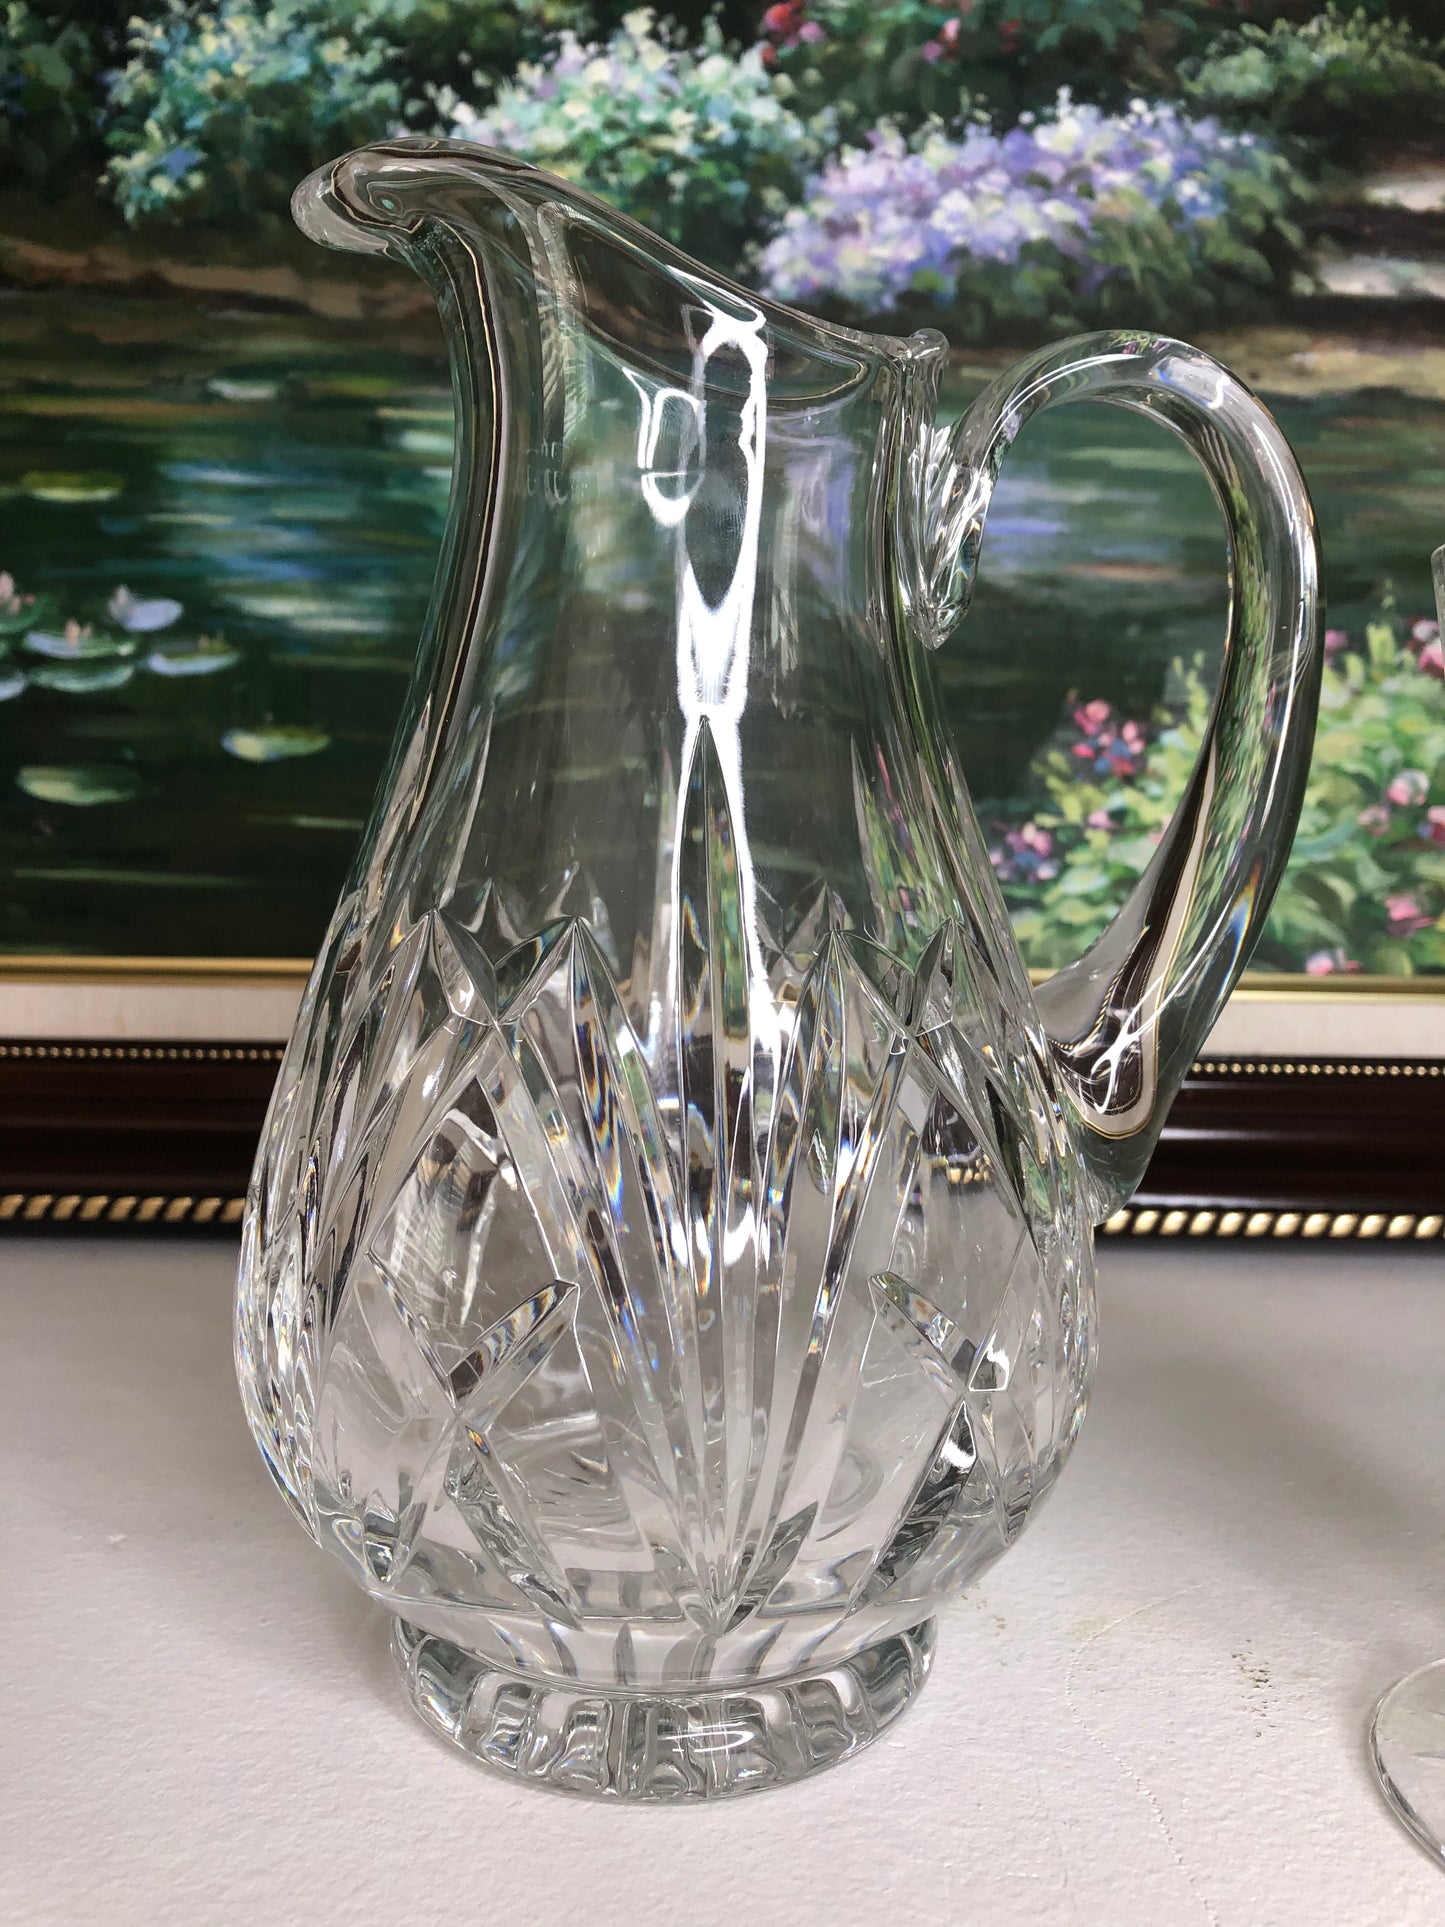 Stunning Marquis by Waterford 9” Crystal Pitcher - Pristine!